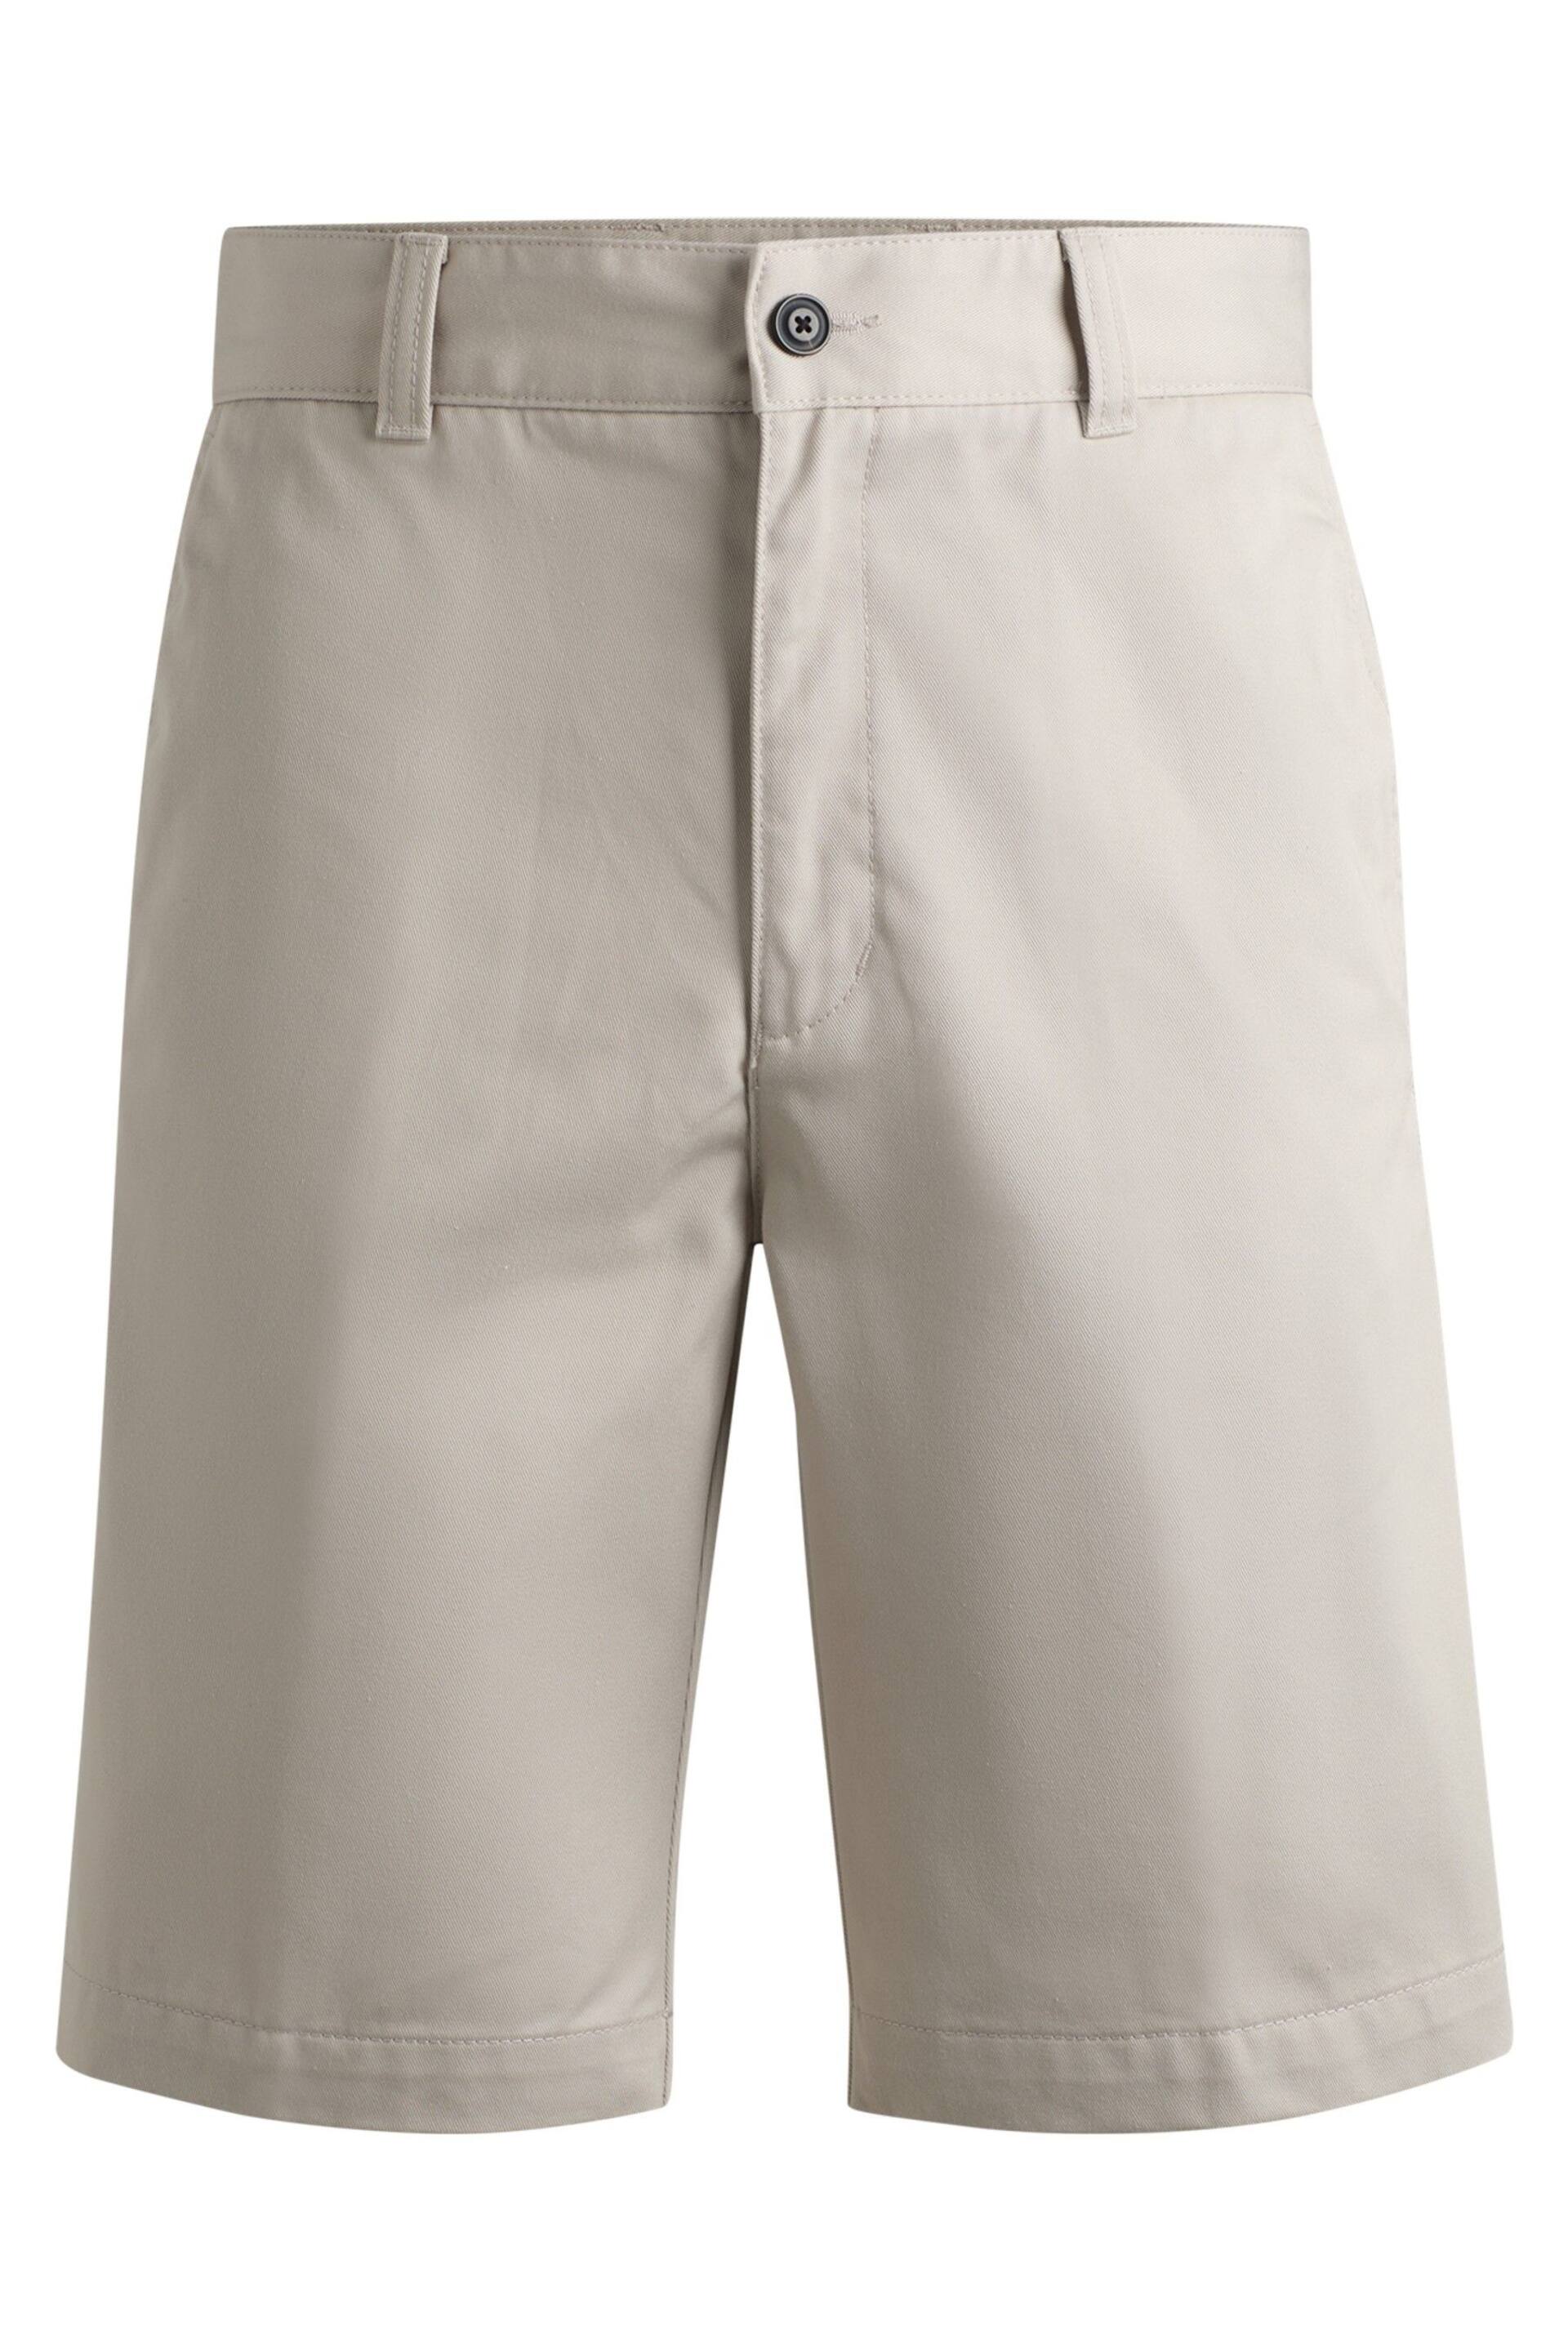 HUGO Regular-fit shorts with slim leg and buttoned pockets - Image 5 of 5